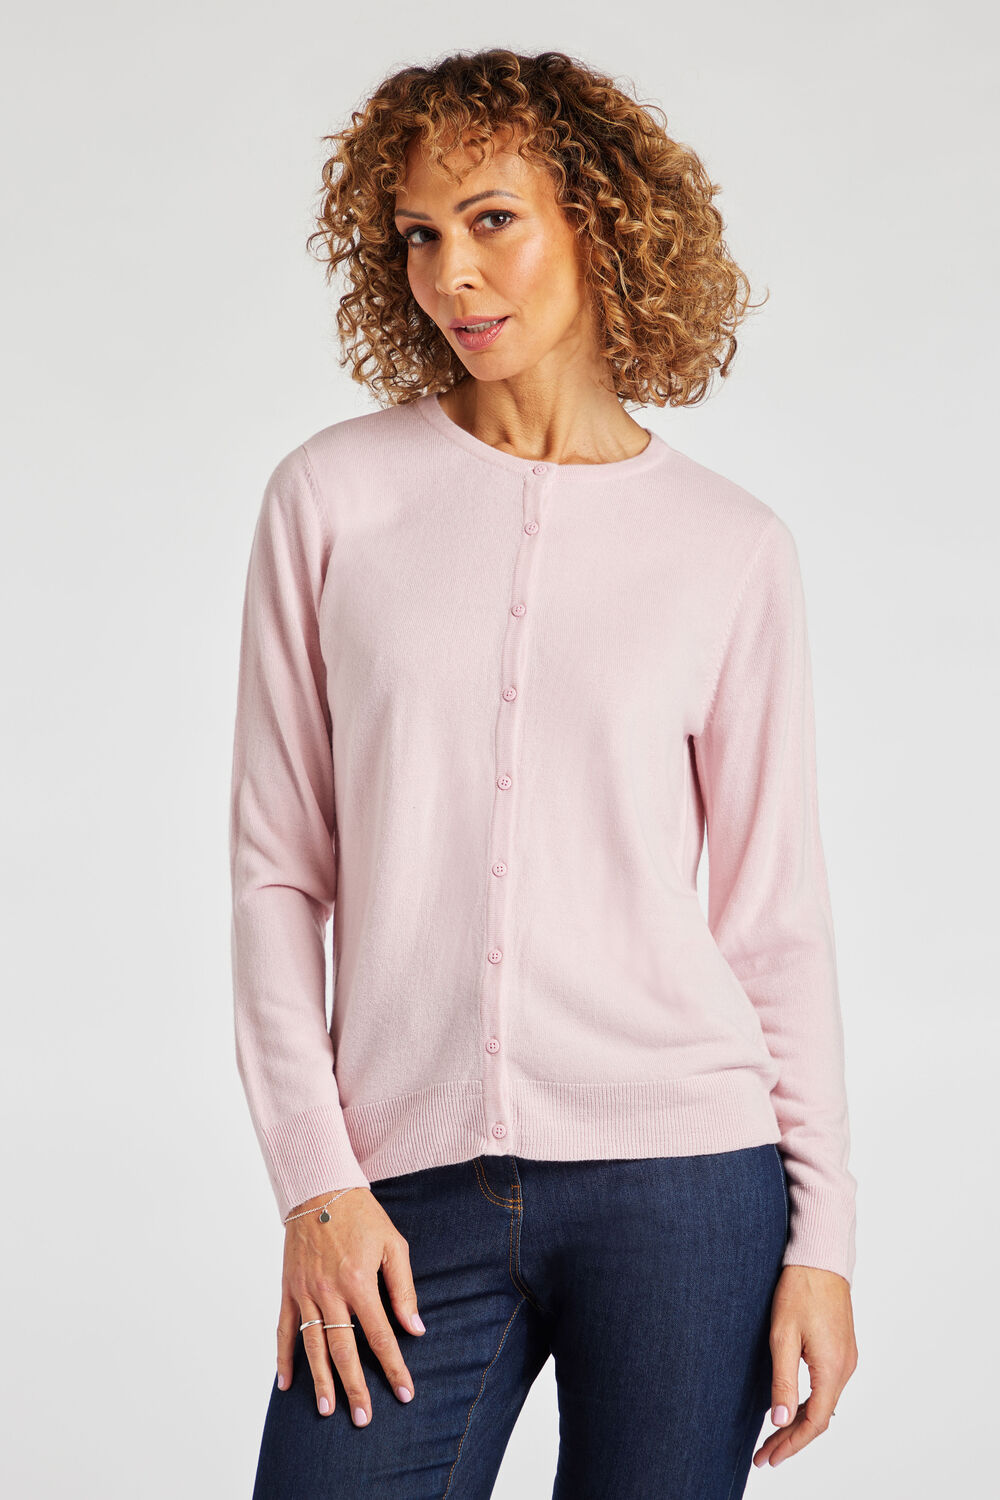 Bonmarche Pink Supersoft Button Front Cardigan, Size: 16